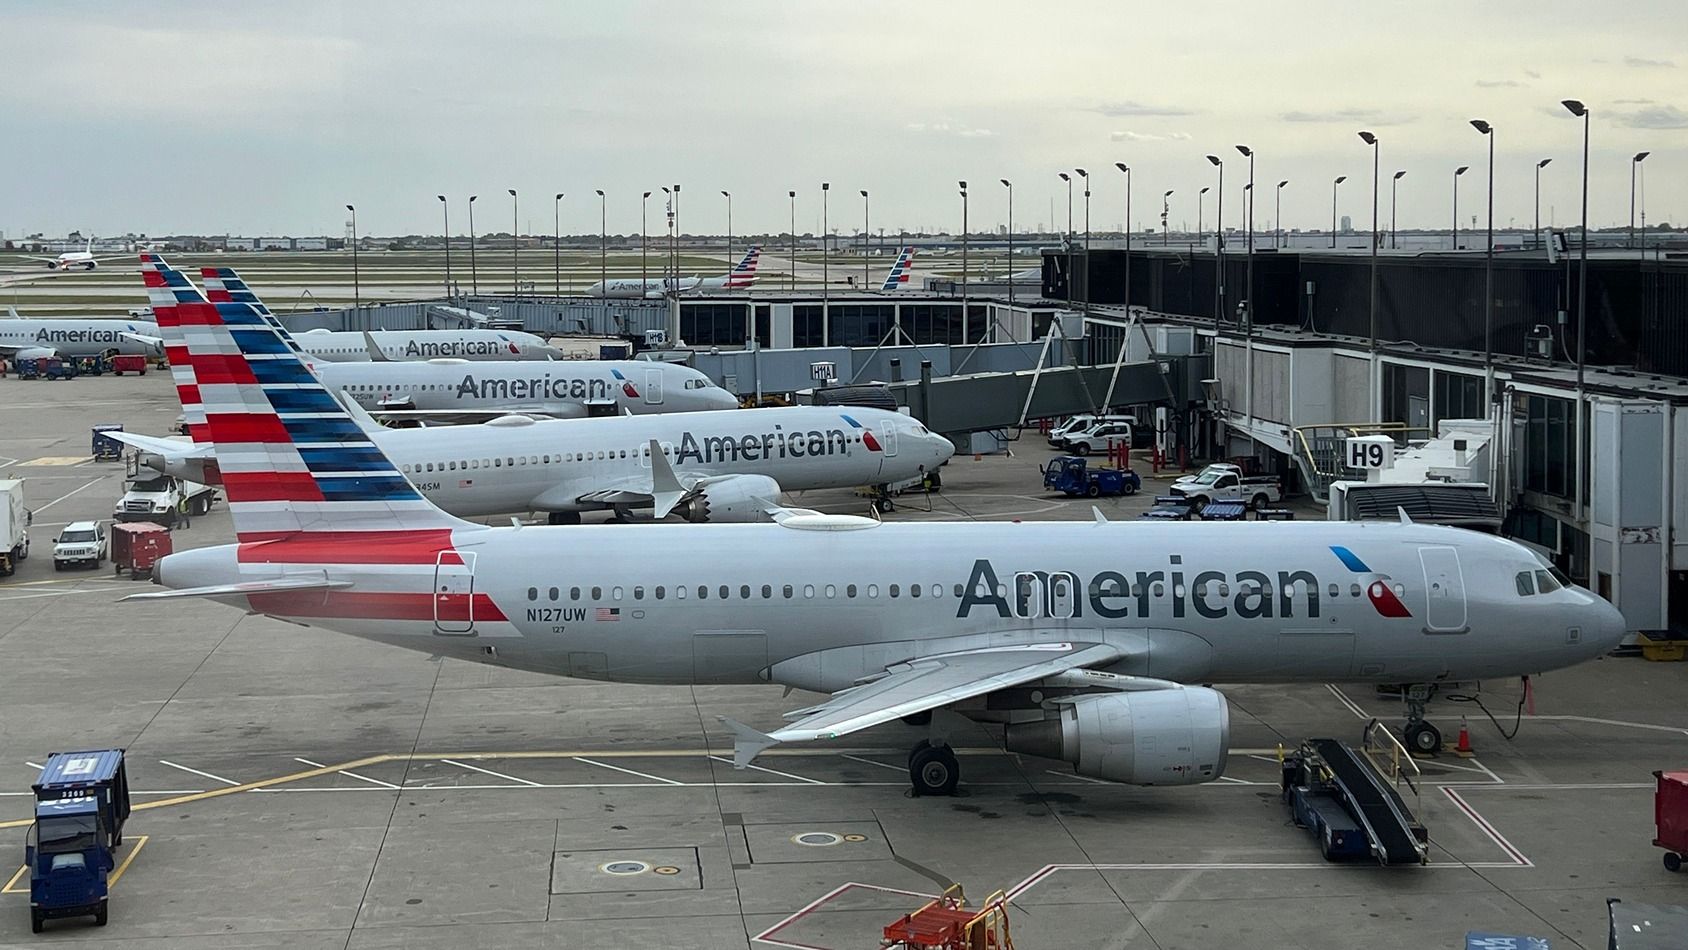 Several American Airlines aircraft parked at gates at Chicago O'Hare International Airport.